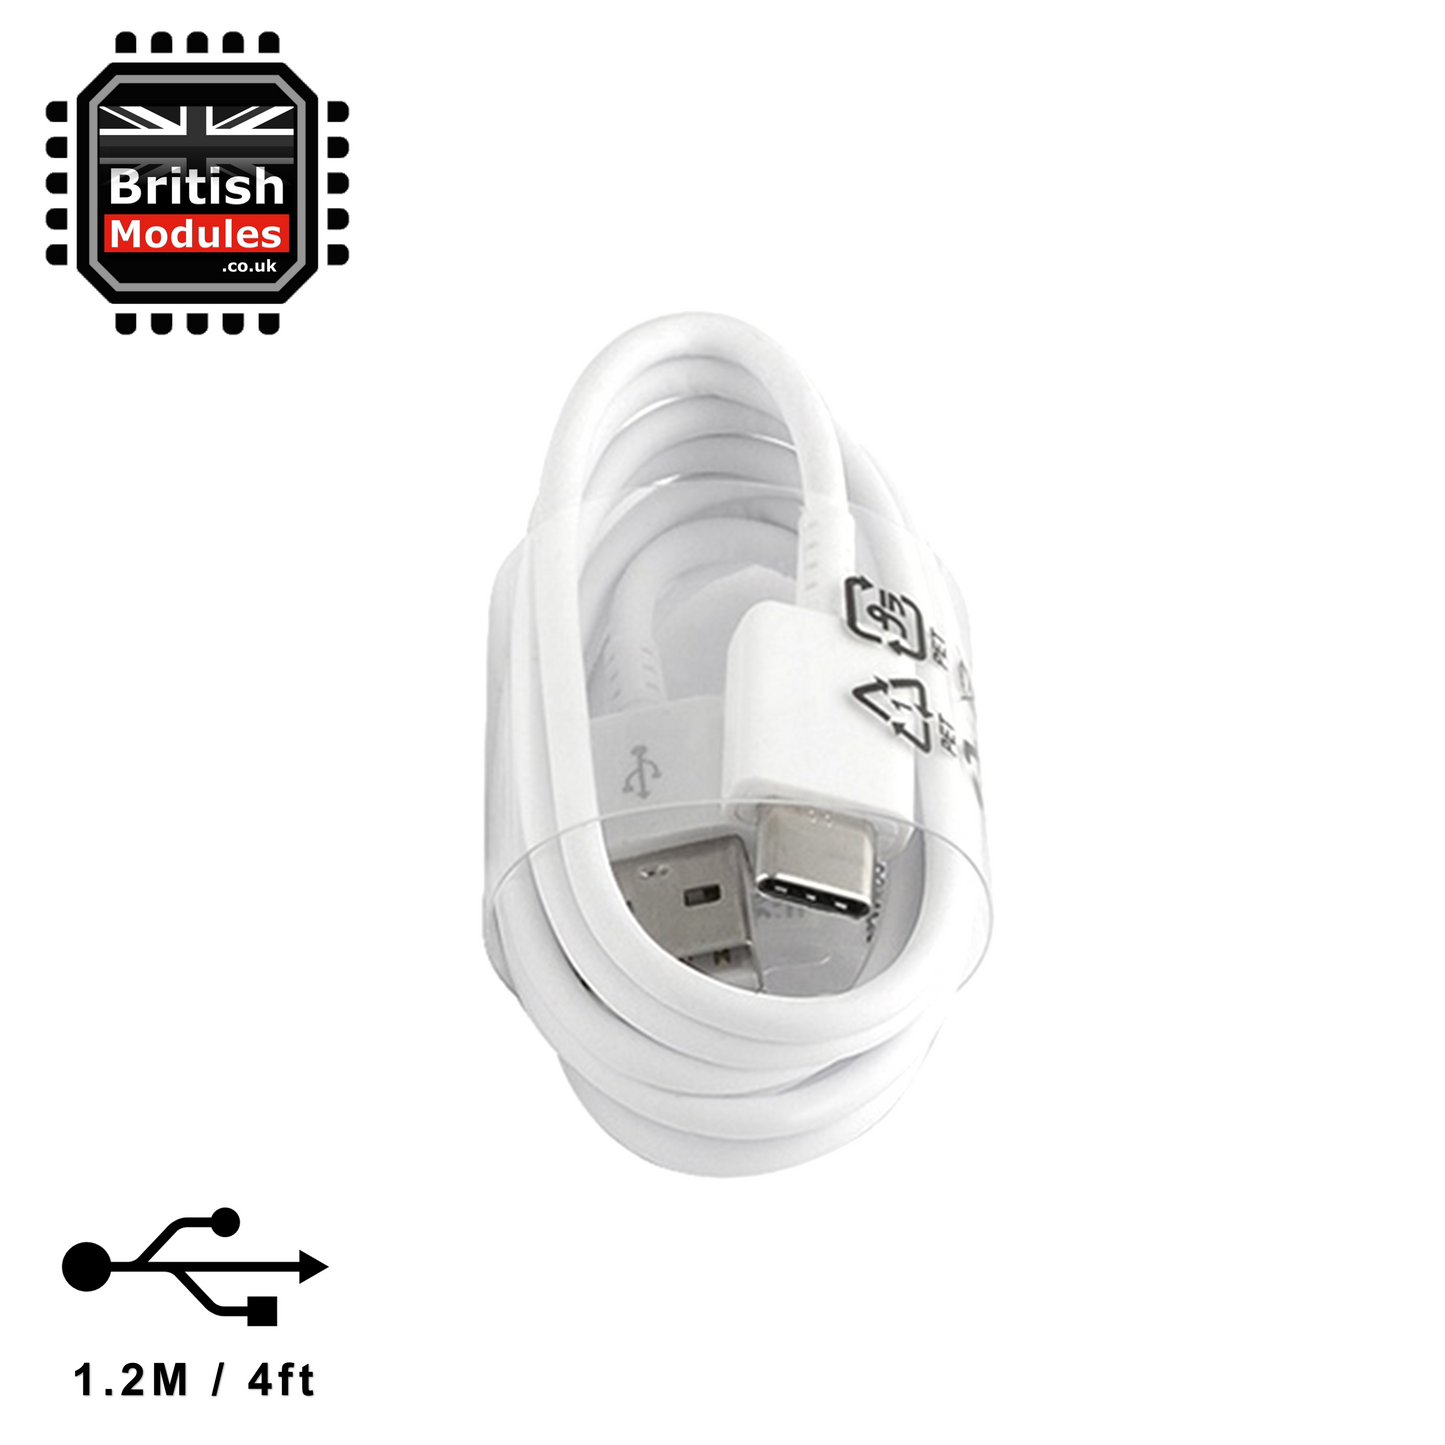 Samsung, EP-DN930CWE, Charger Cable / Data Cable, USB to USB Type C, 1.2M, White